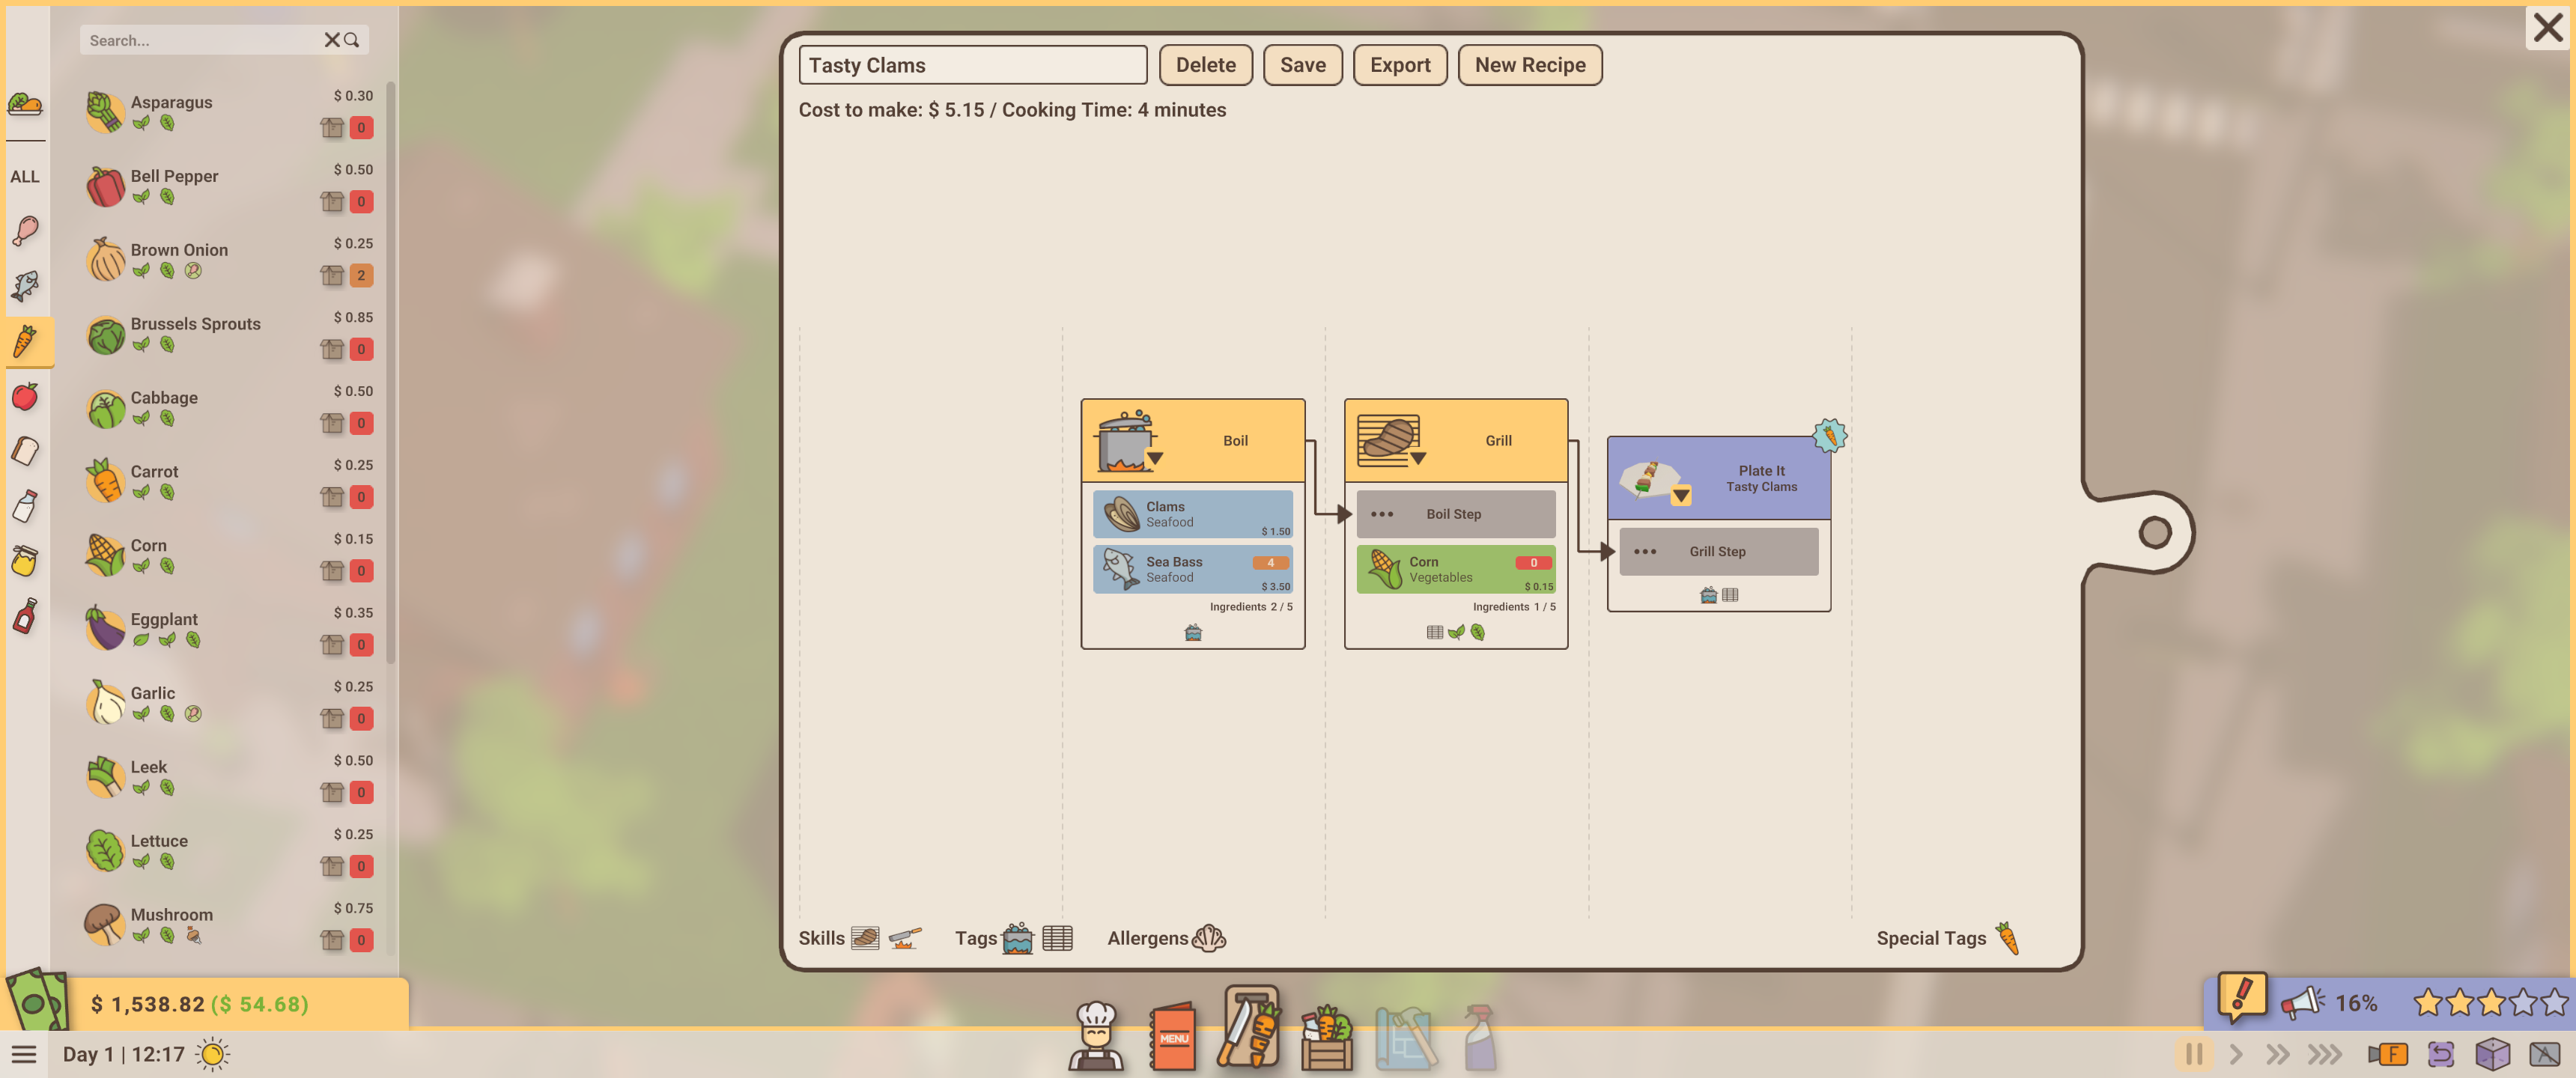 A screenshot of the recipe editor in Recipe for Disaster.